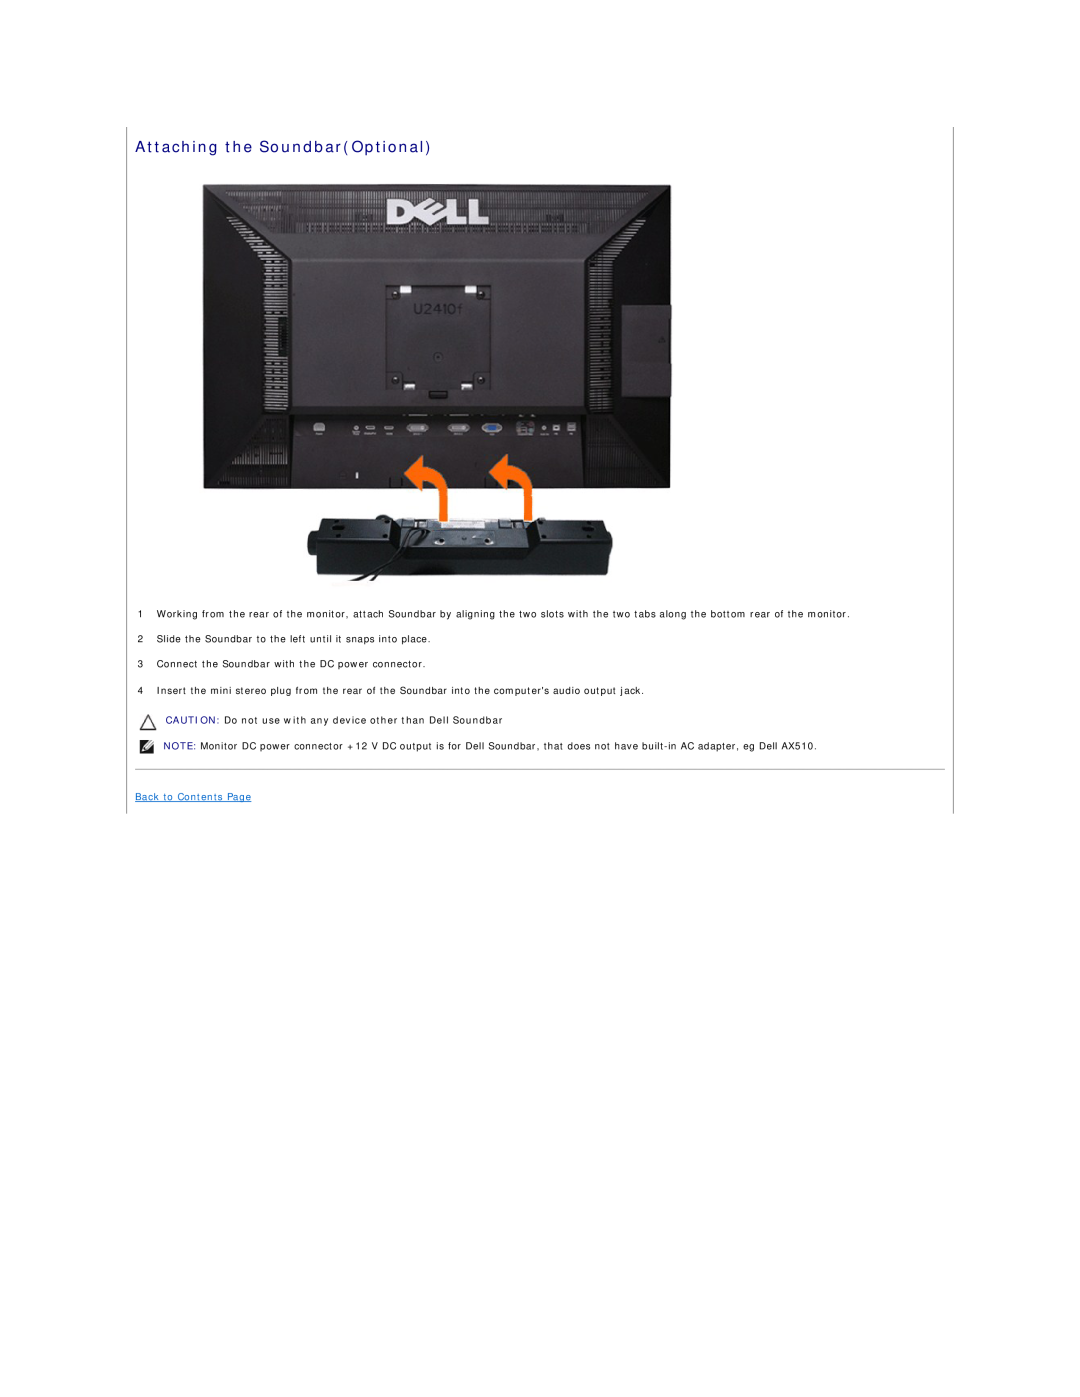 Dell 320-8277, U2410 manual Attaching the SoundbarOptional, CAUTION Do not use with any device other than Dell Soundbar 